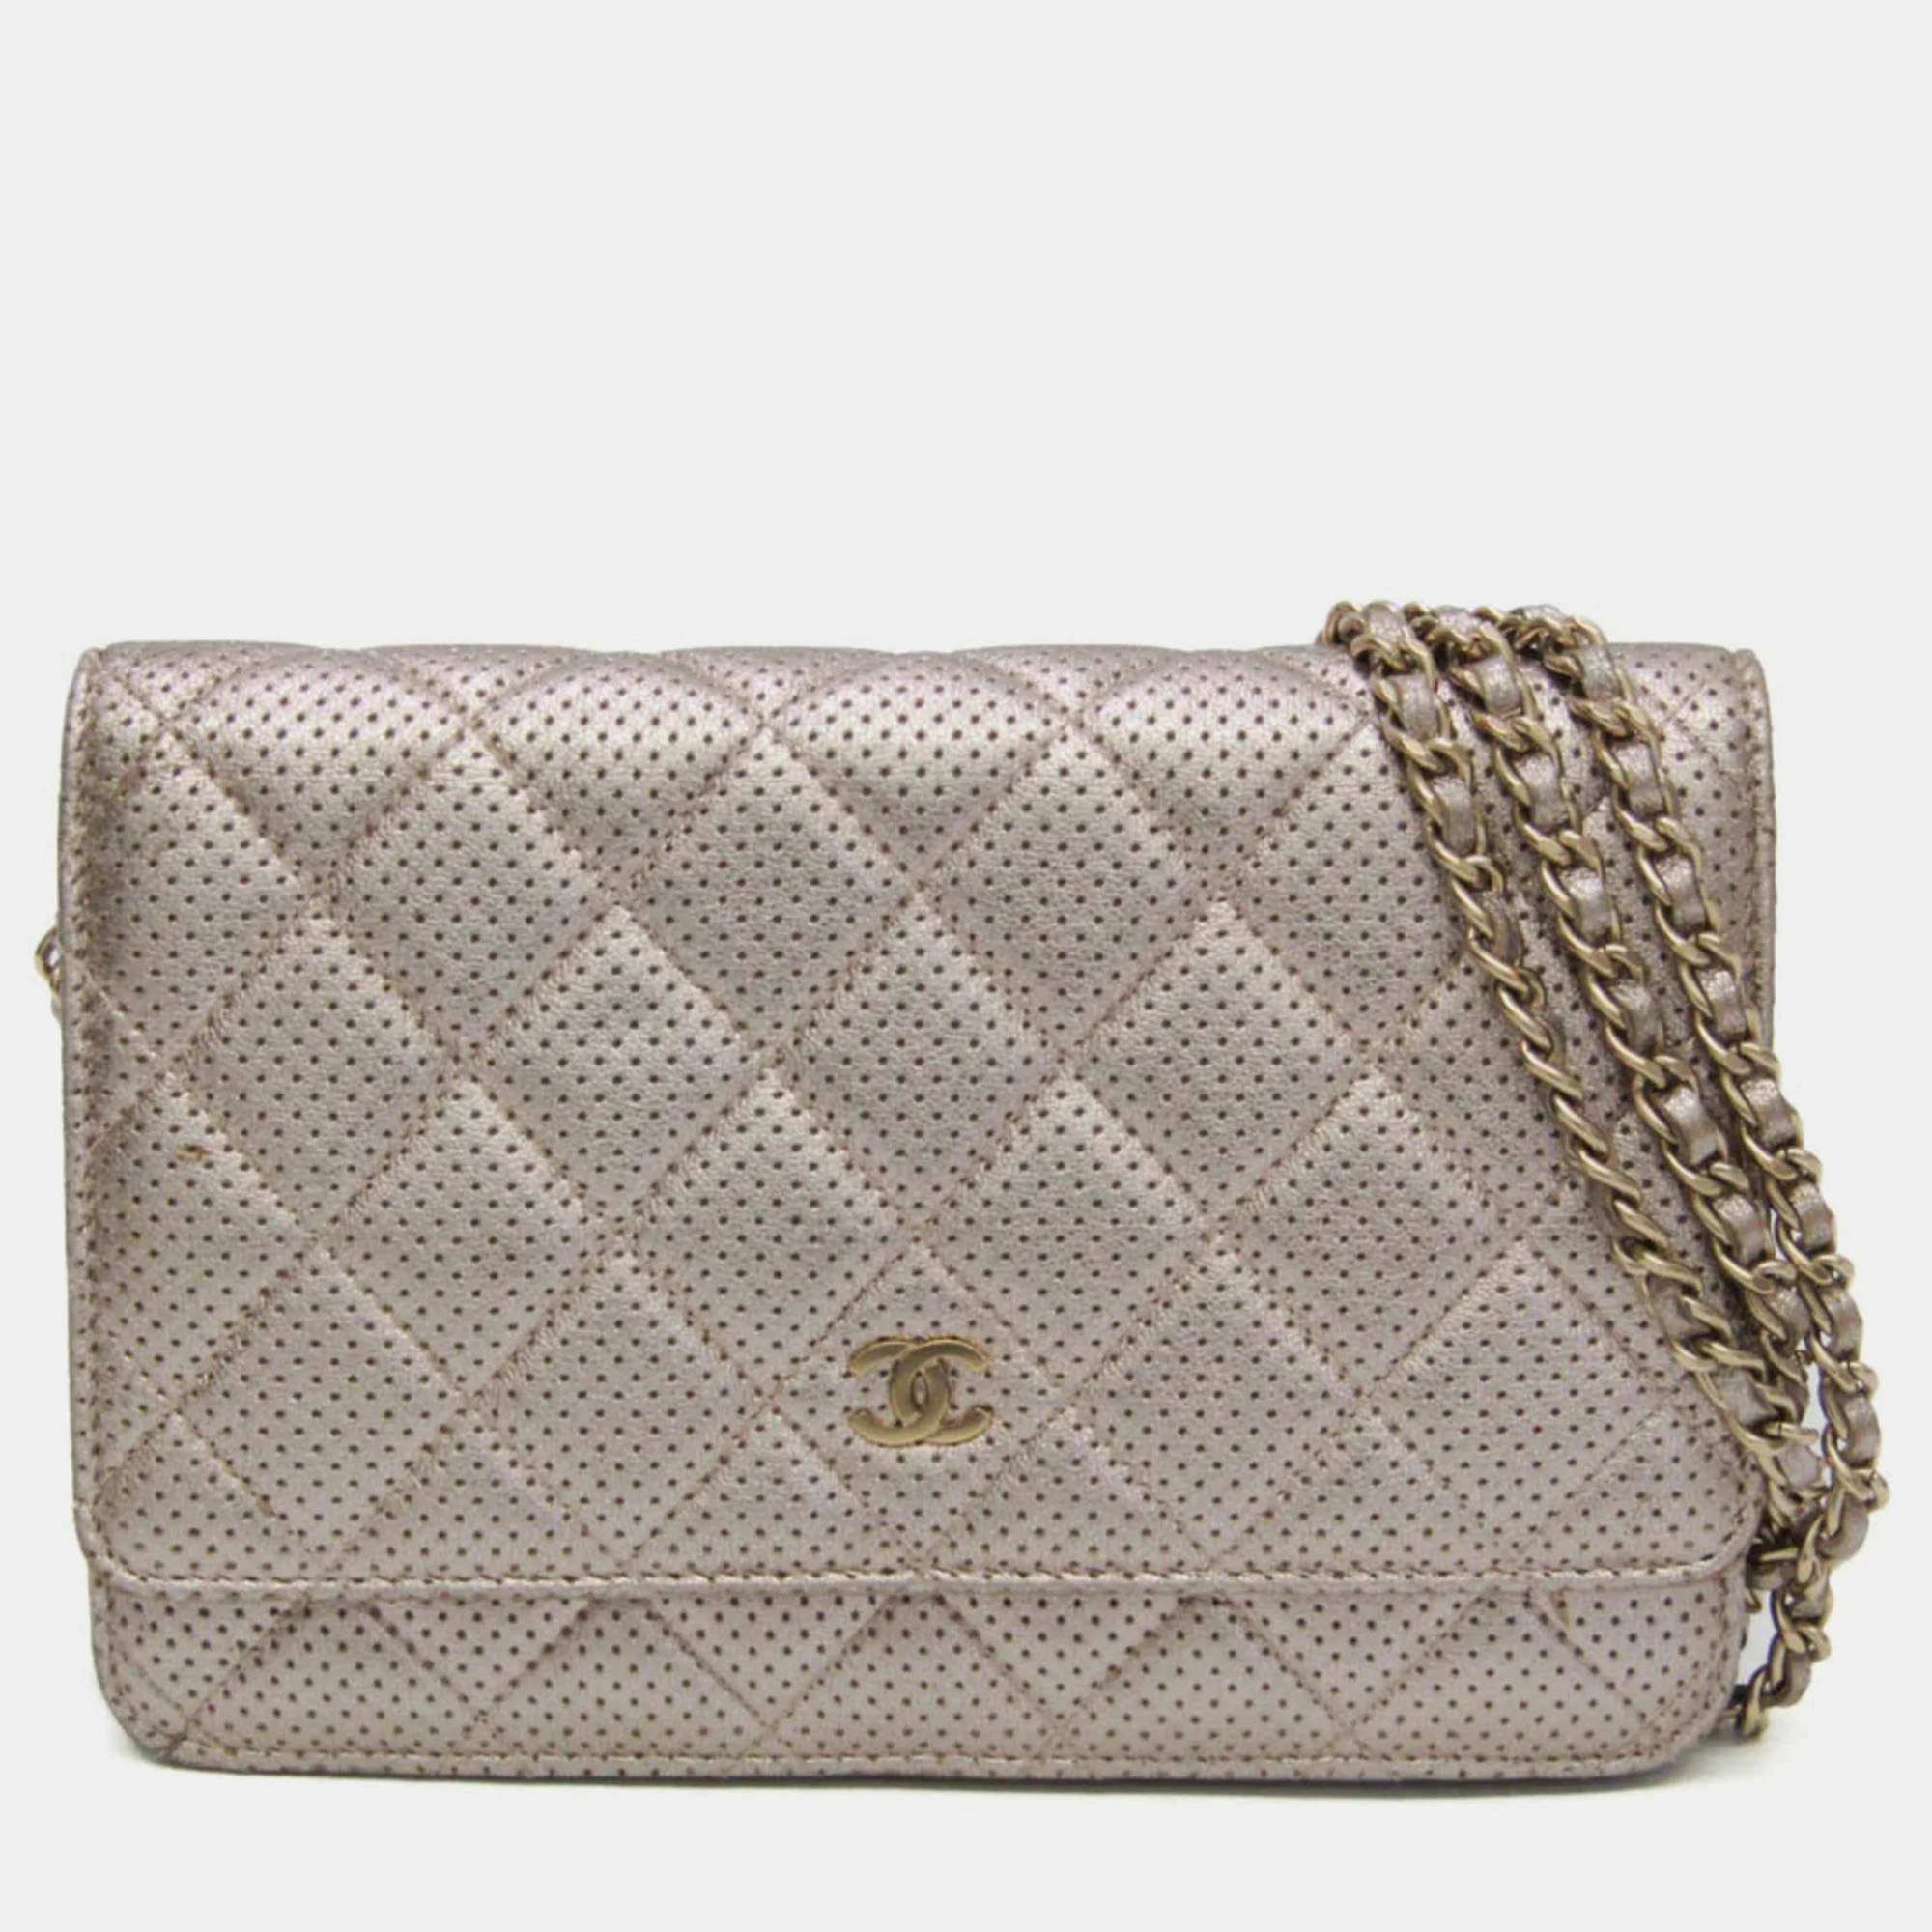 Chanel silver perforated classic wallet on chain